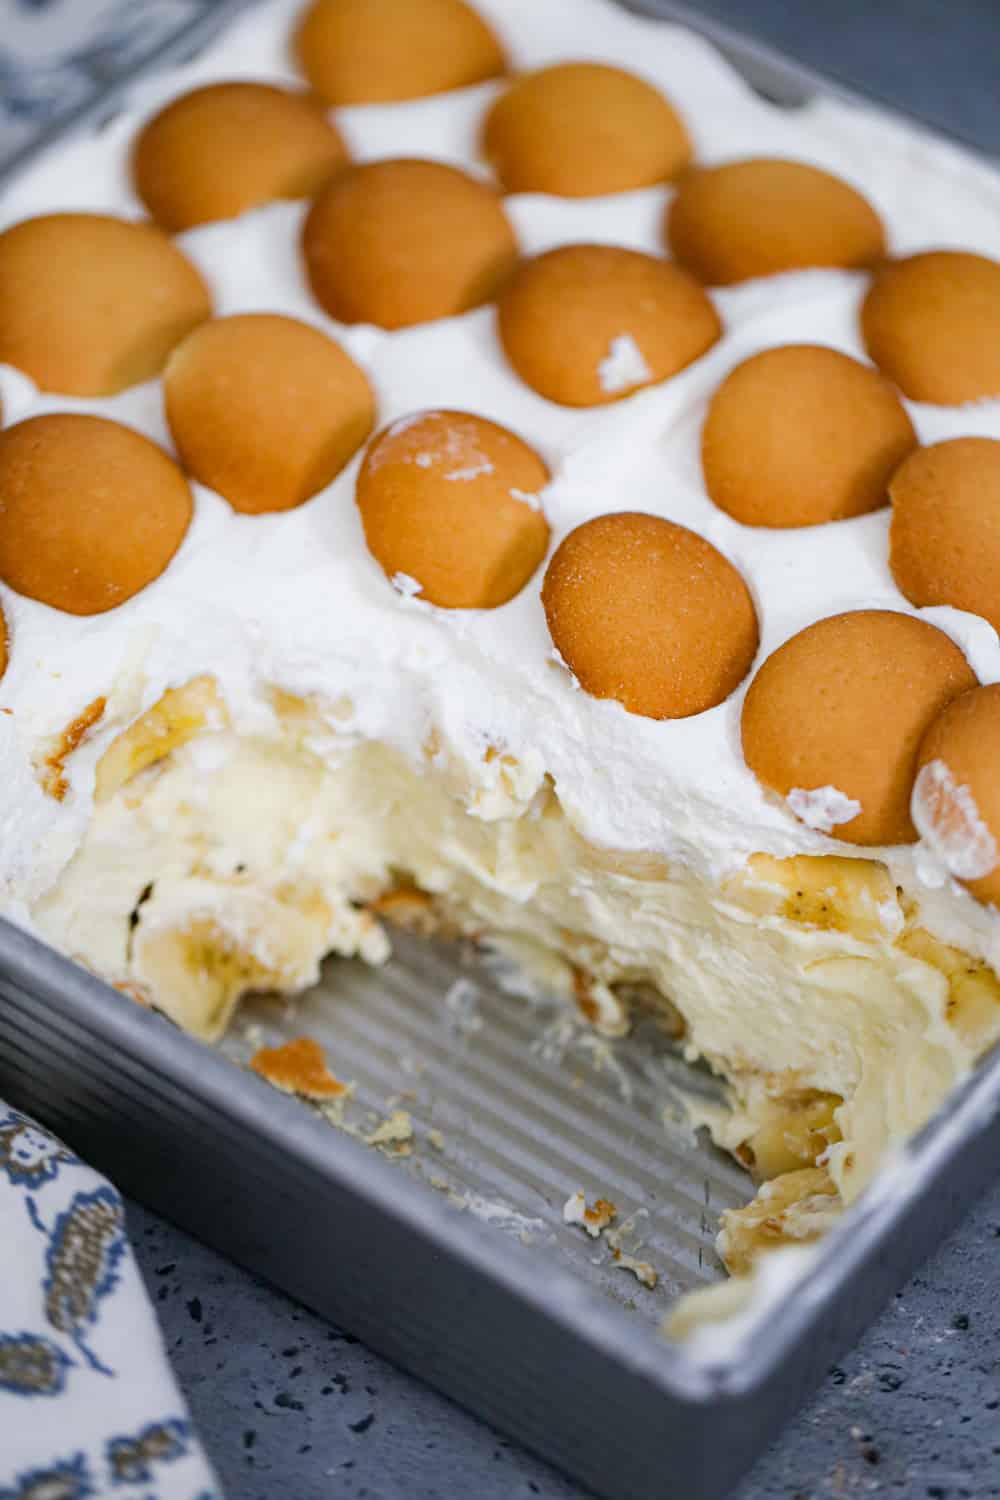 banana pudding recipe with nilla wafers and whipped cream